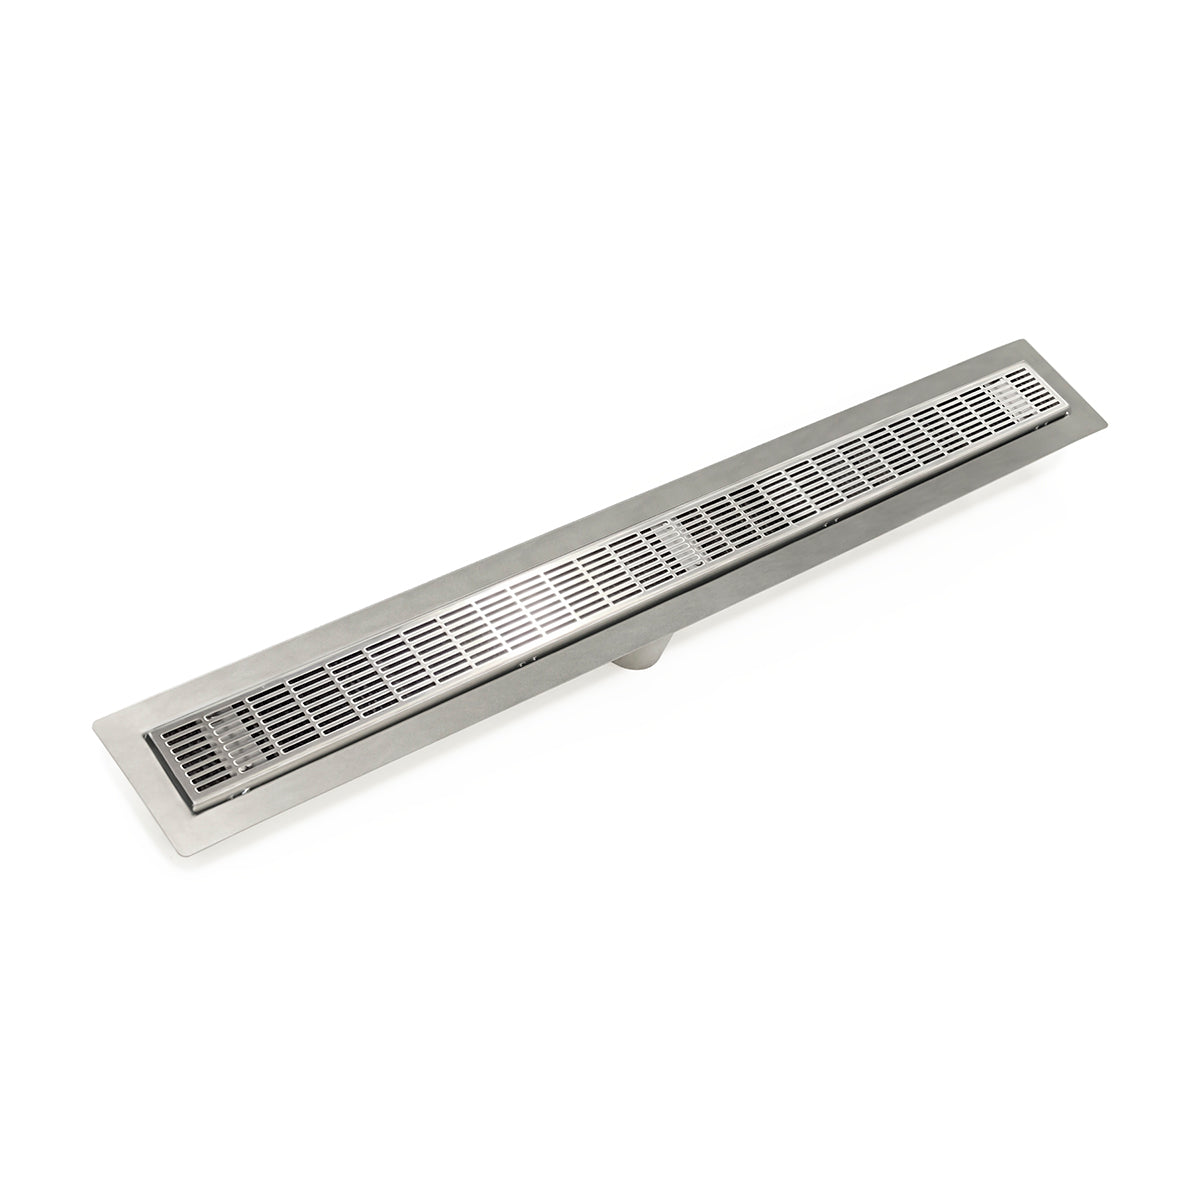 Infinity Drain 60" FF Series Fixed Flange Linear Drain Kit with 2 1/2" Perforated Slotted Grate